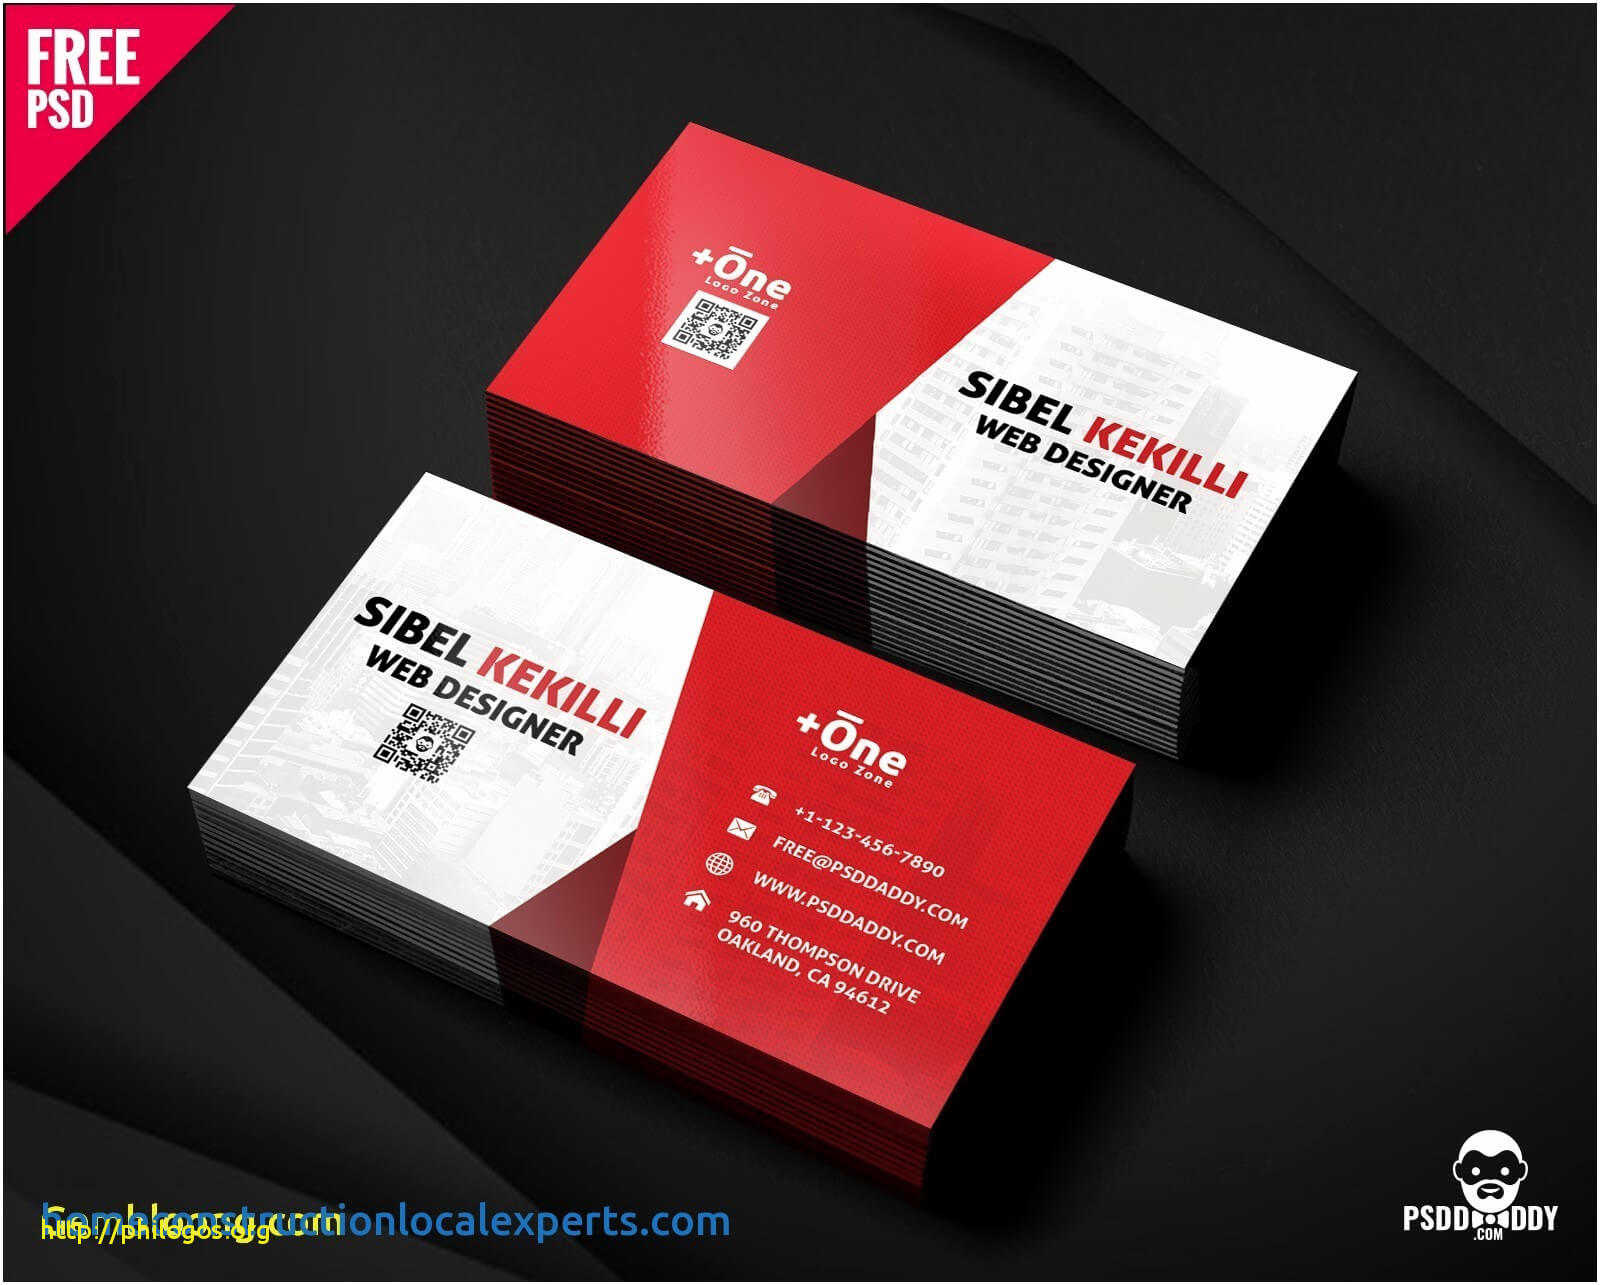 Inspirational Food Business Cards Templates Free | Philogos With Regard To Restaurant Business Cards Templates Free